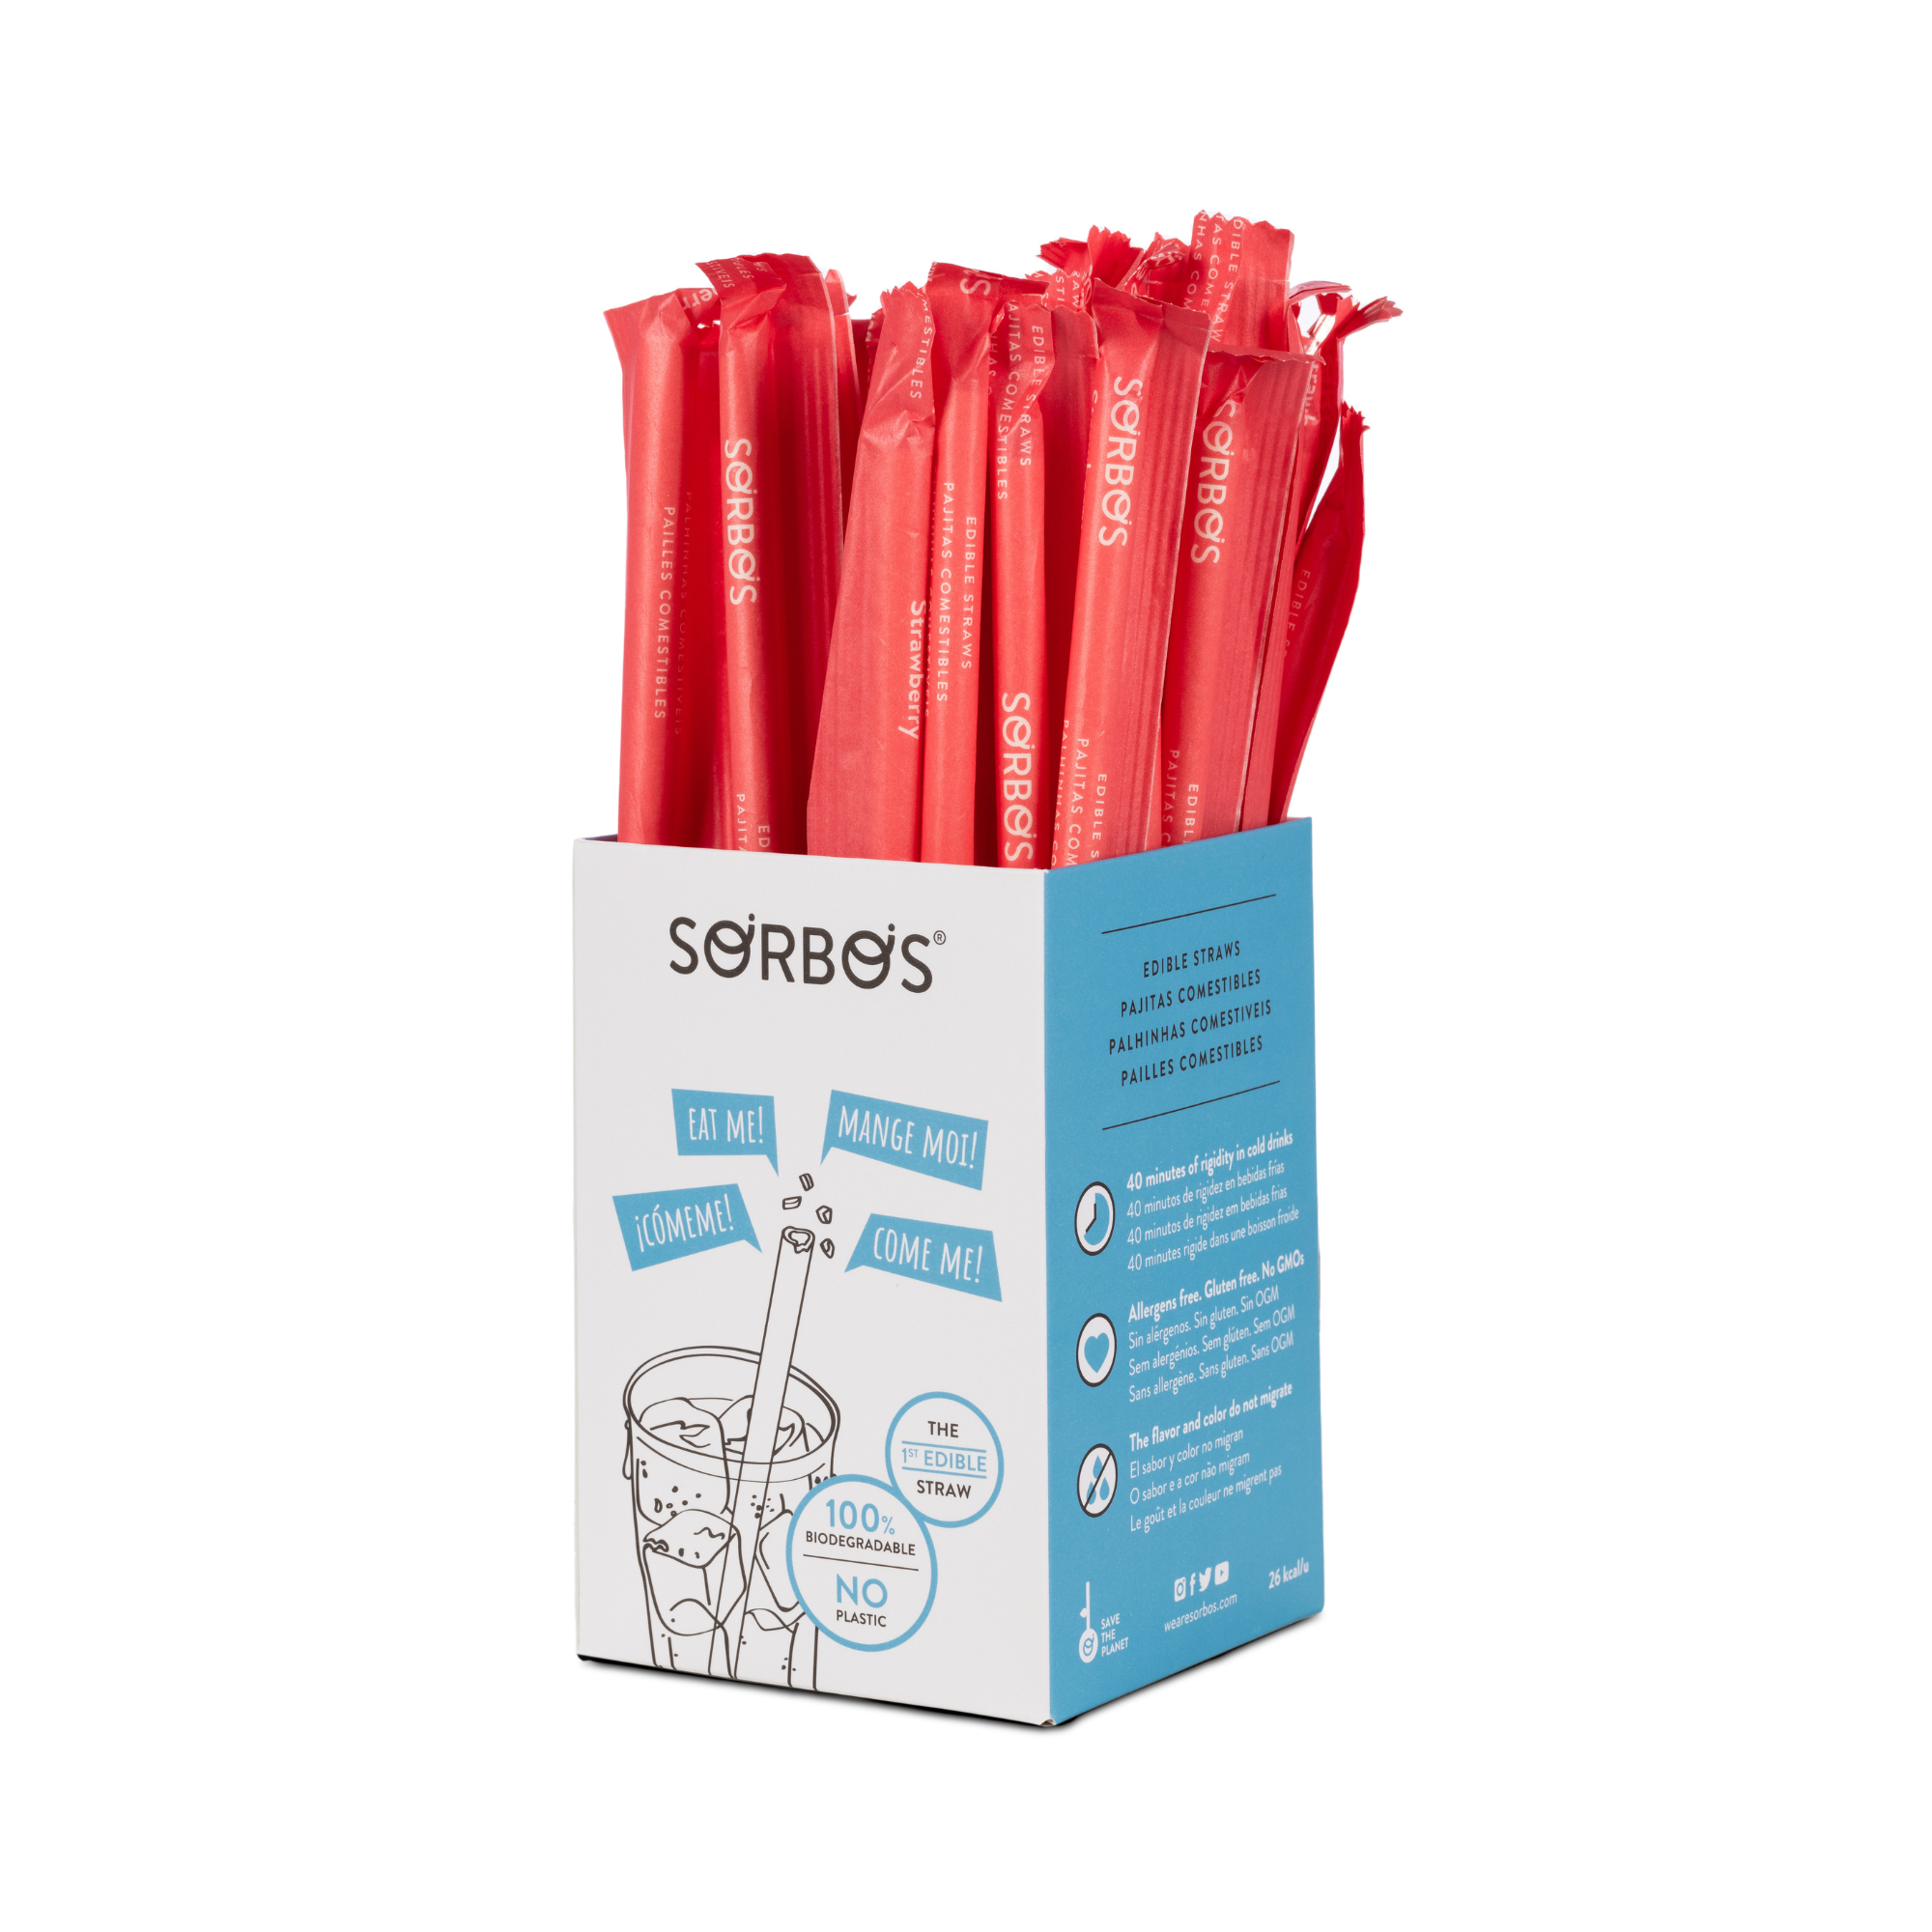 Sorbos Edible Strawberry Flavored Straws (200/case)